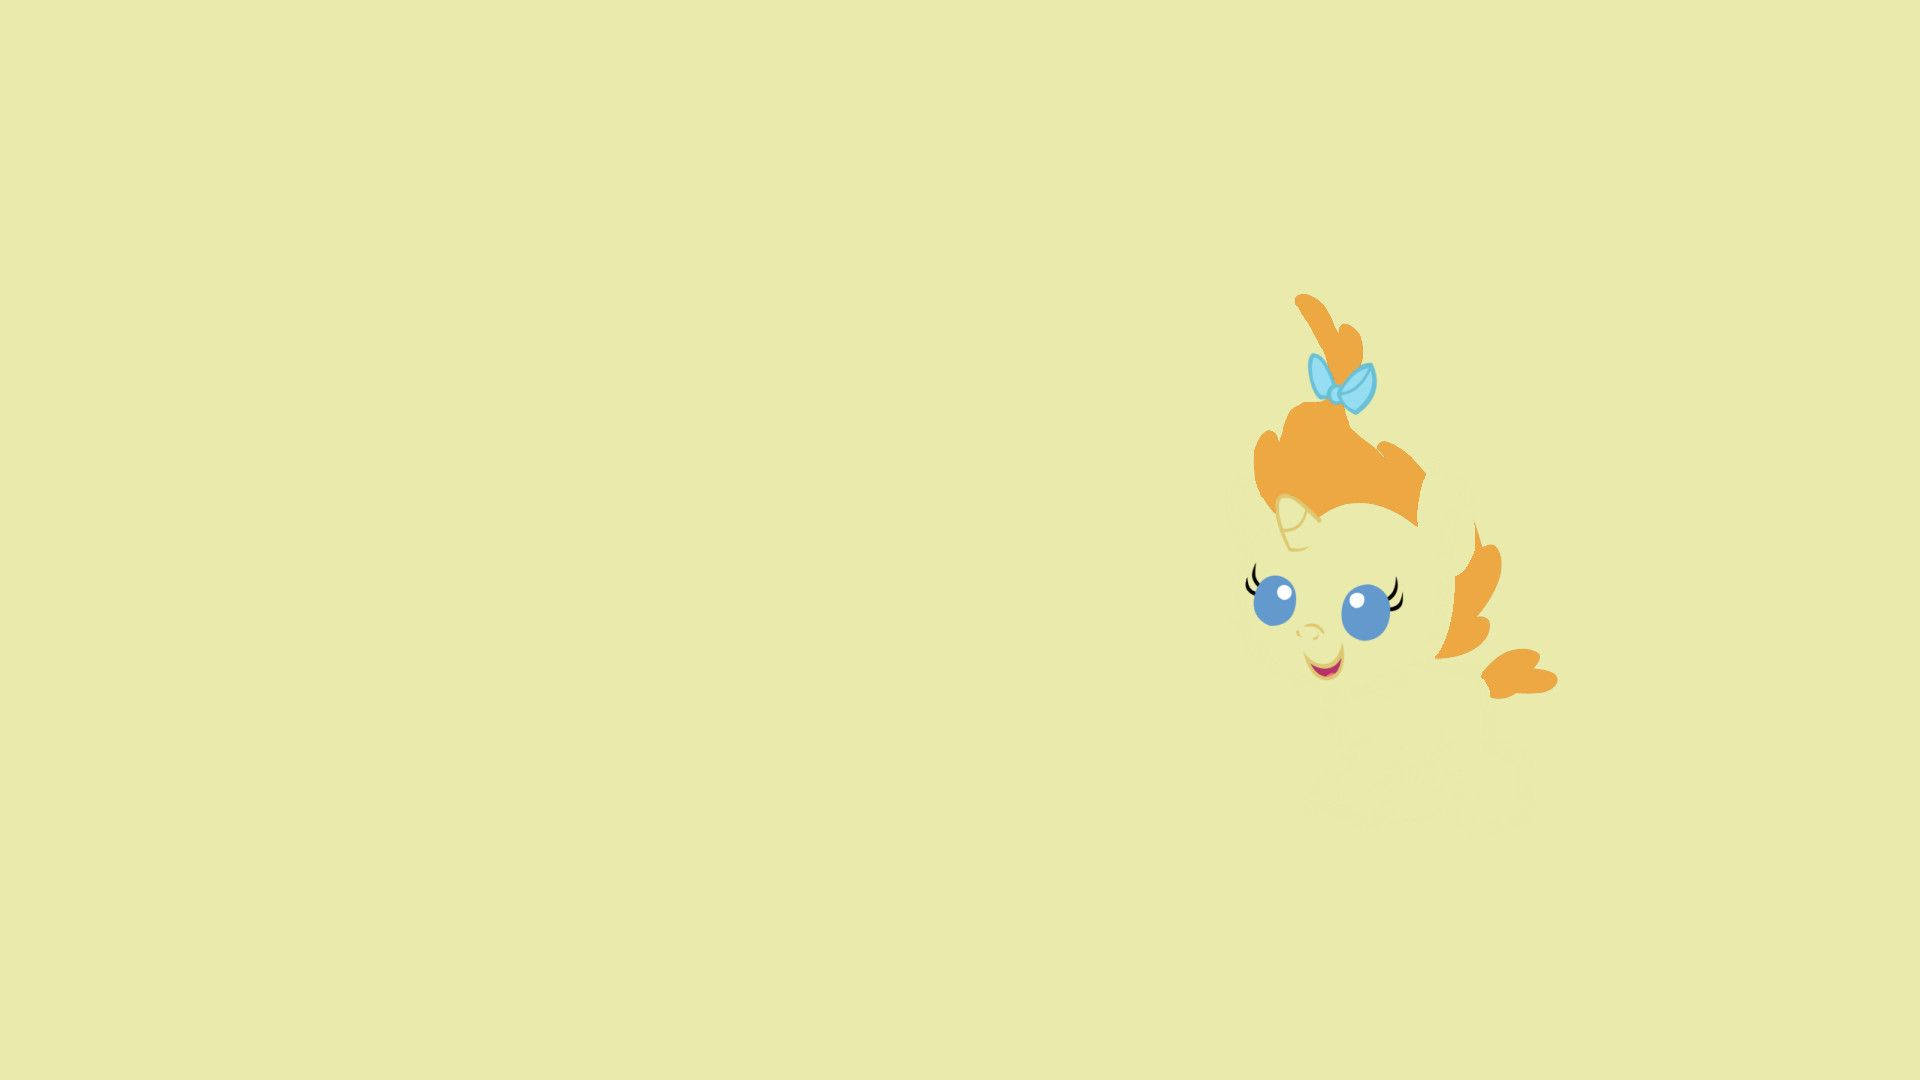 A Cartoon Character With Blue Hair And Orange Eyes Wallpaper